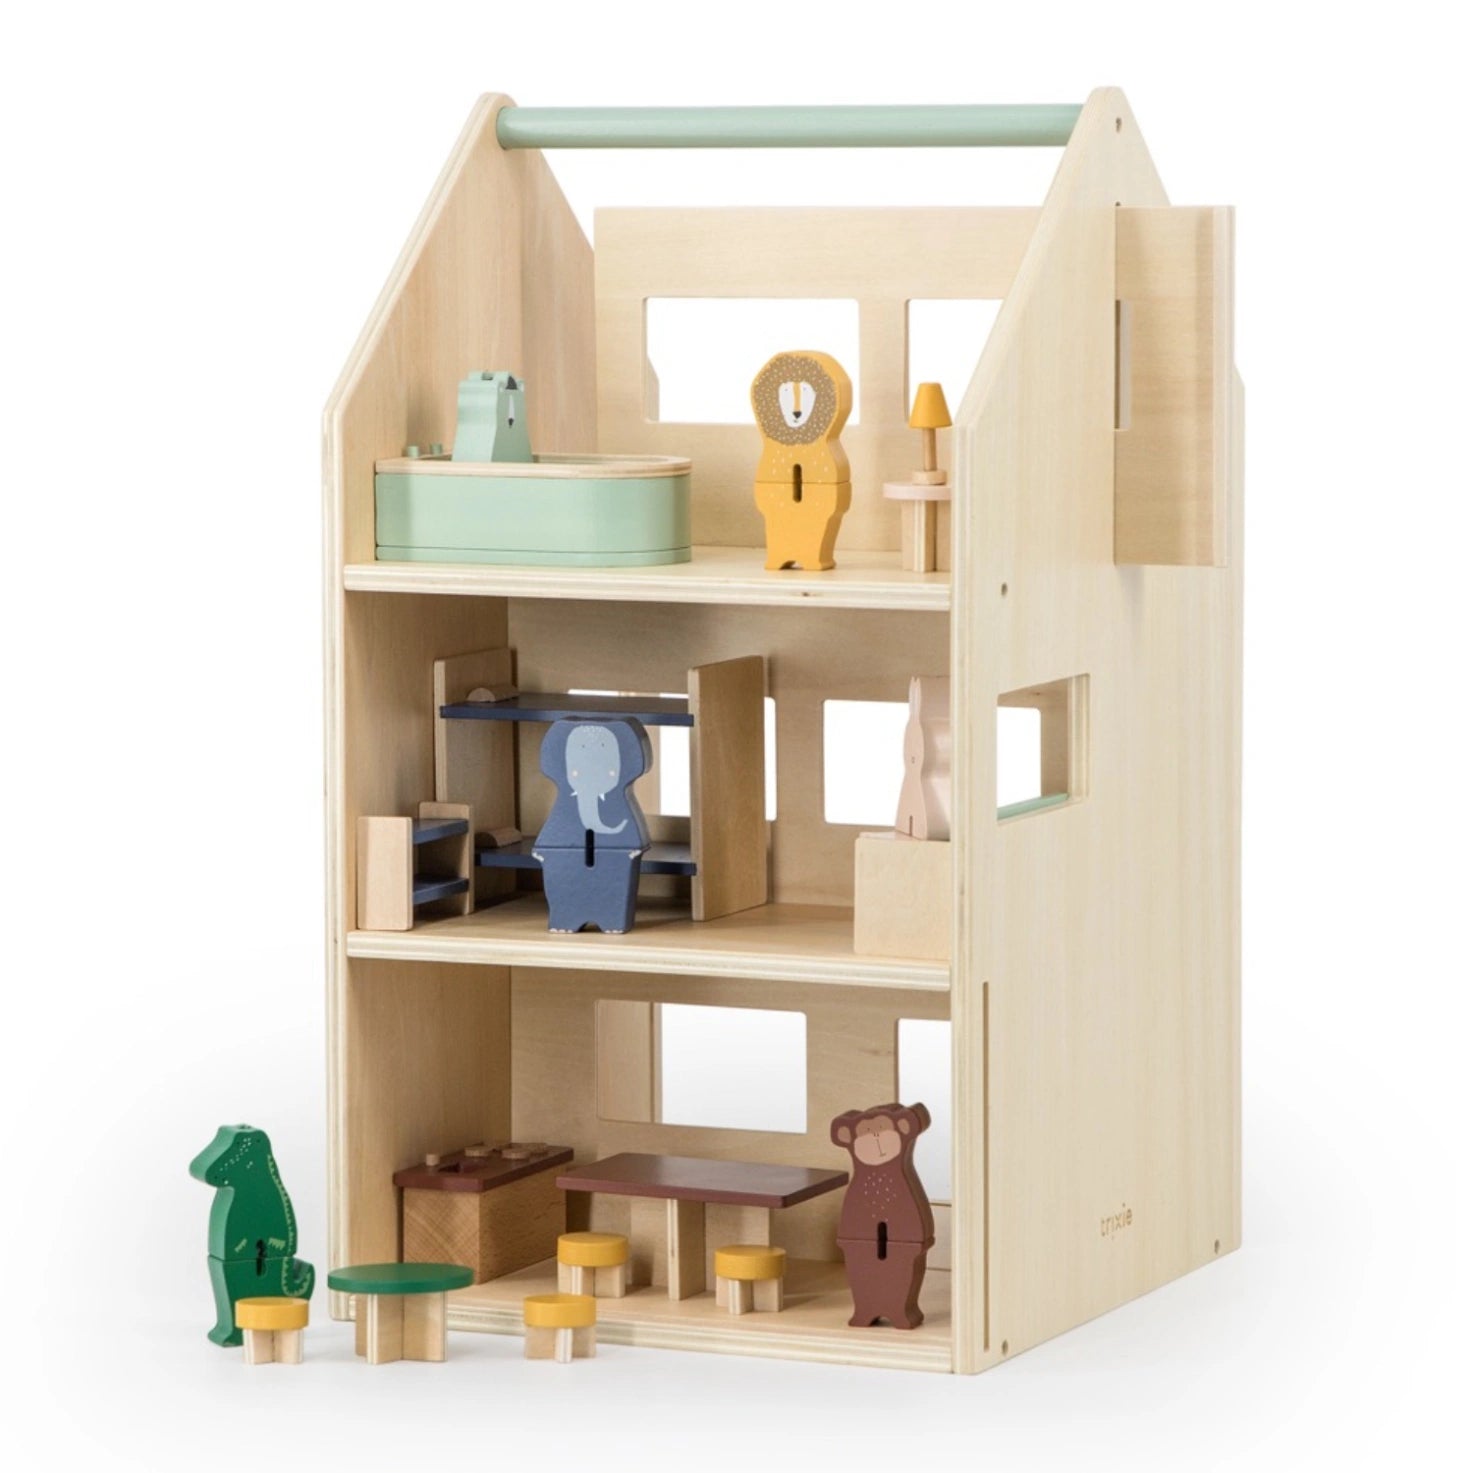 An image of Wooden Dolls House With Accessories